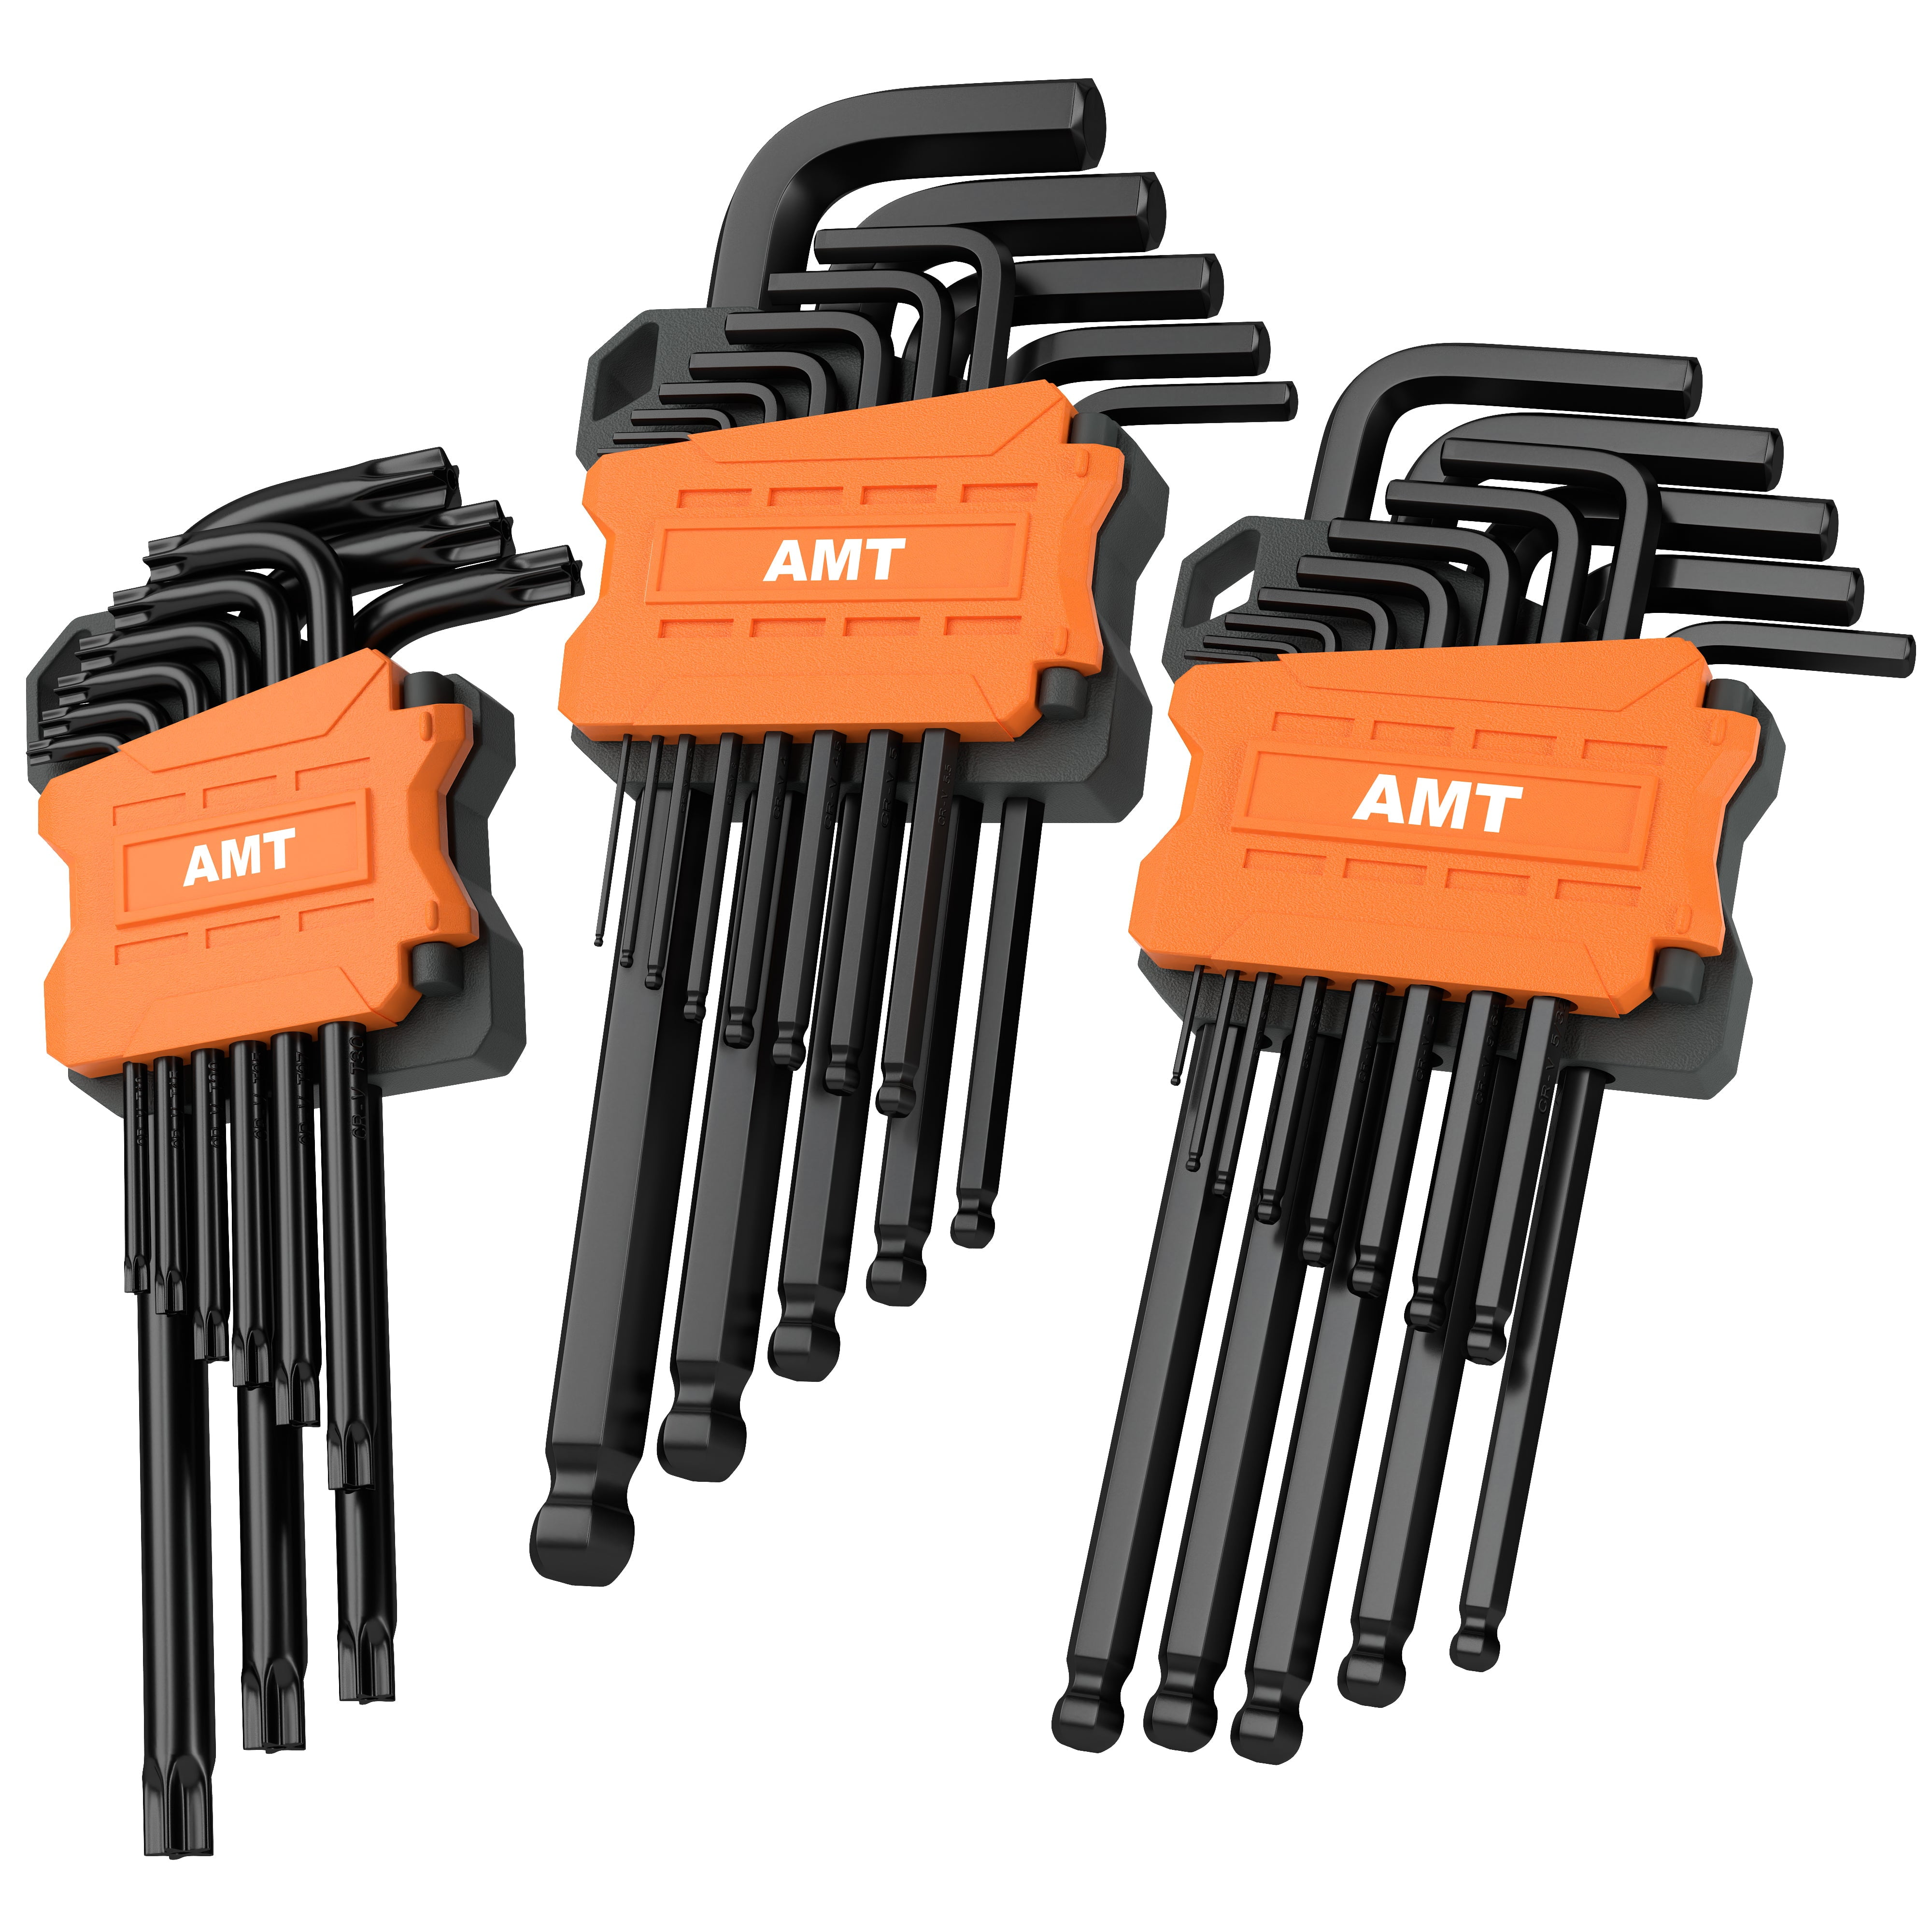 35 PC Long Arm Ball End Hex Key Allen Wrench Set Inch Metric Star With Bag Gift 